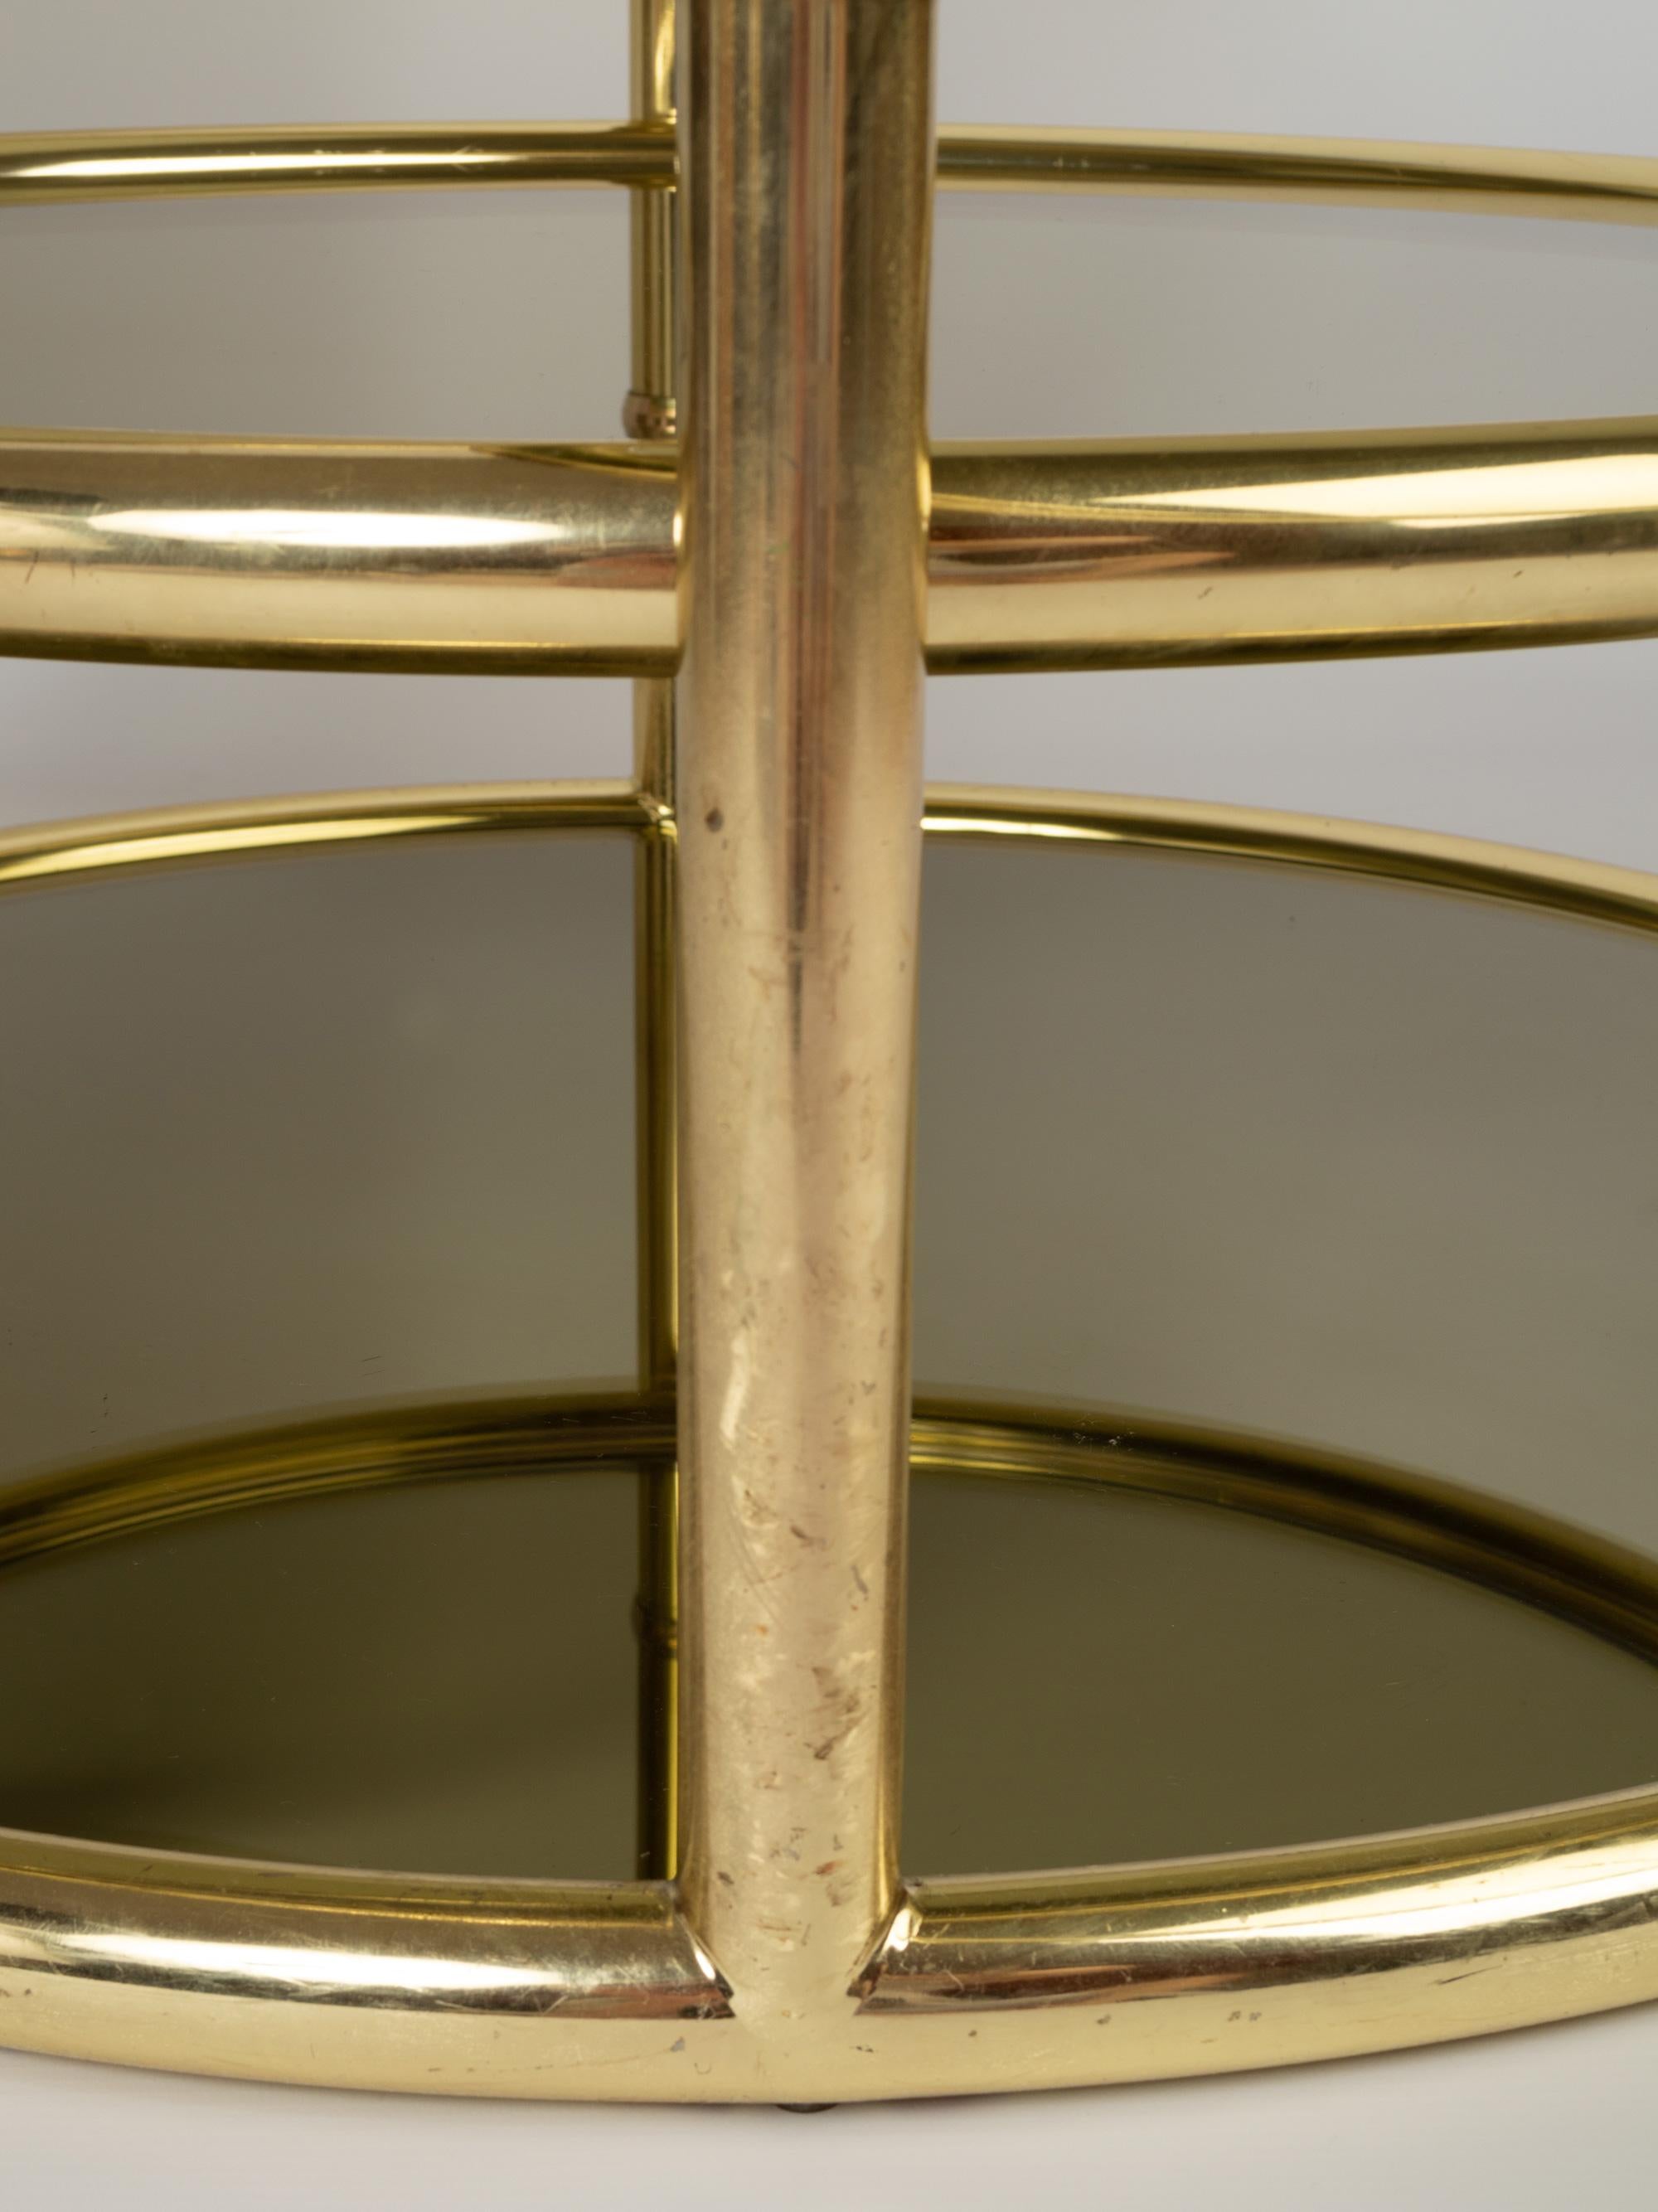 Midcentury Circular Brass Swivel Tiered Coffee Cocktail Table, attributed to DIA For Sale 4